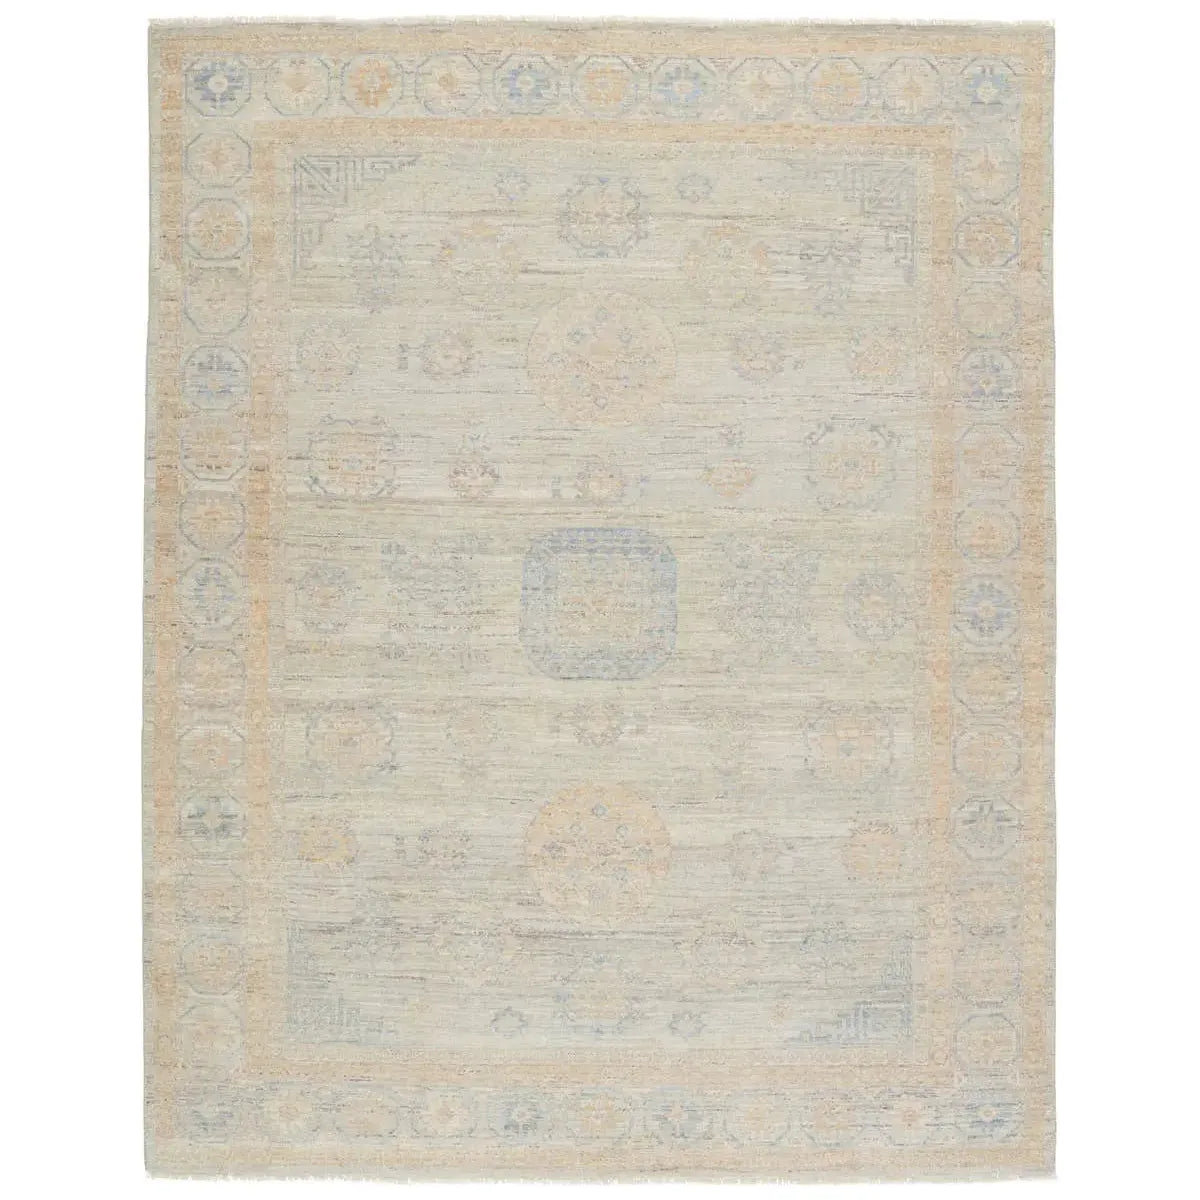 The Orenda collection features heirloom-quality designs of muted and uniquely updated Old World patterns. The Cerelia area rug boasts a beautifully washed medallion motif with ornate and fine-lined details. Amethyst Home provides interior design services, furniture, rugs, and lighting in the Kansas City metro area.